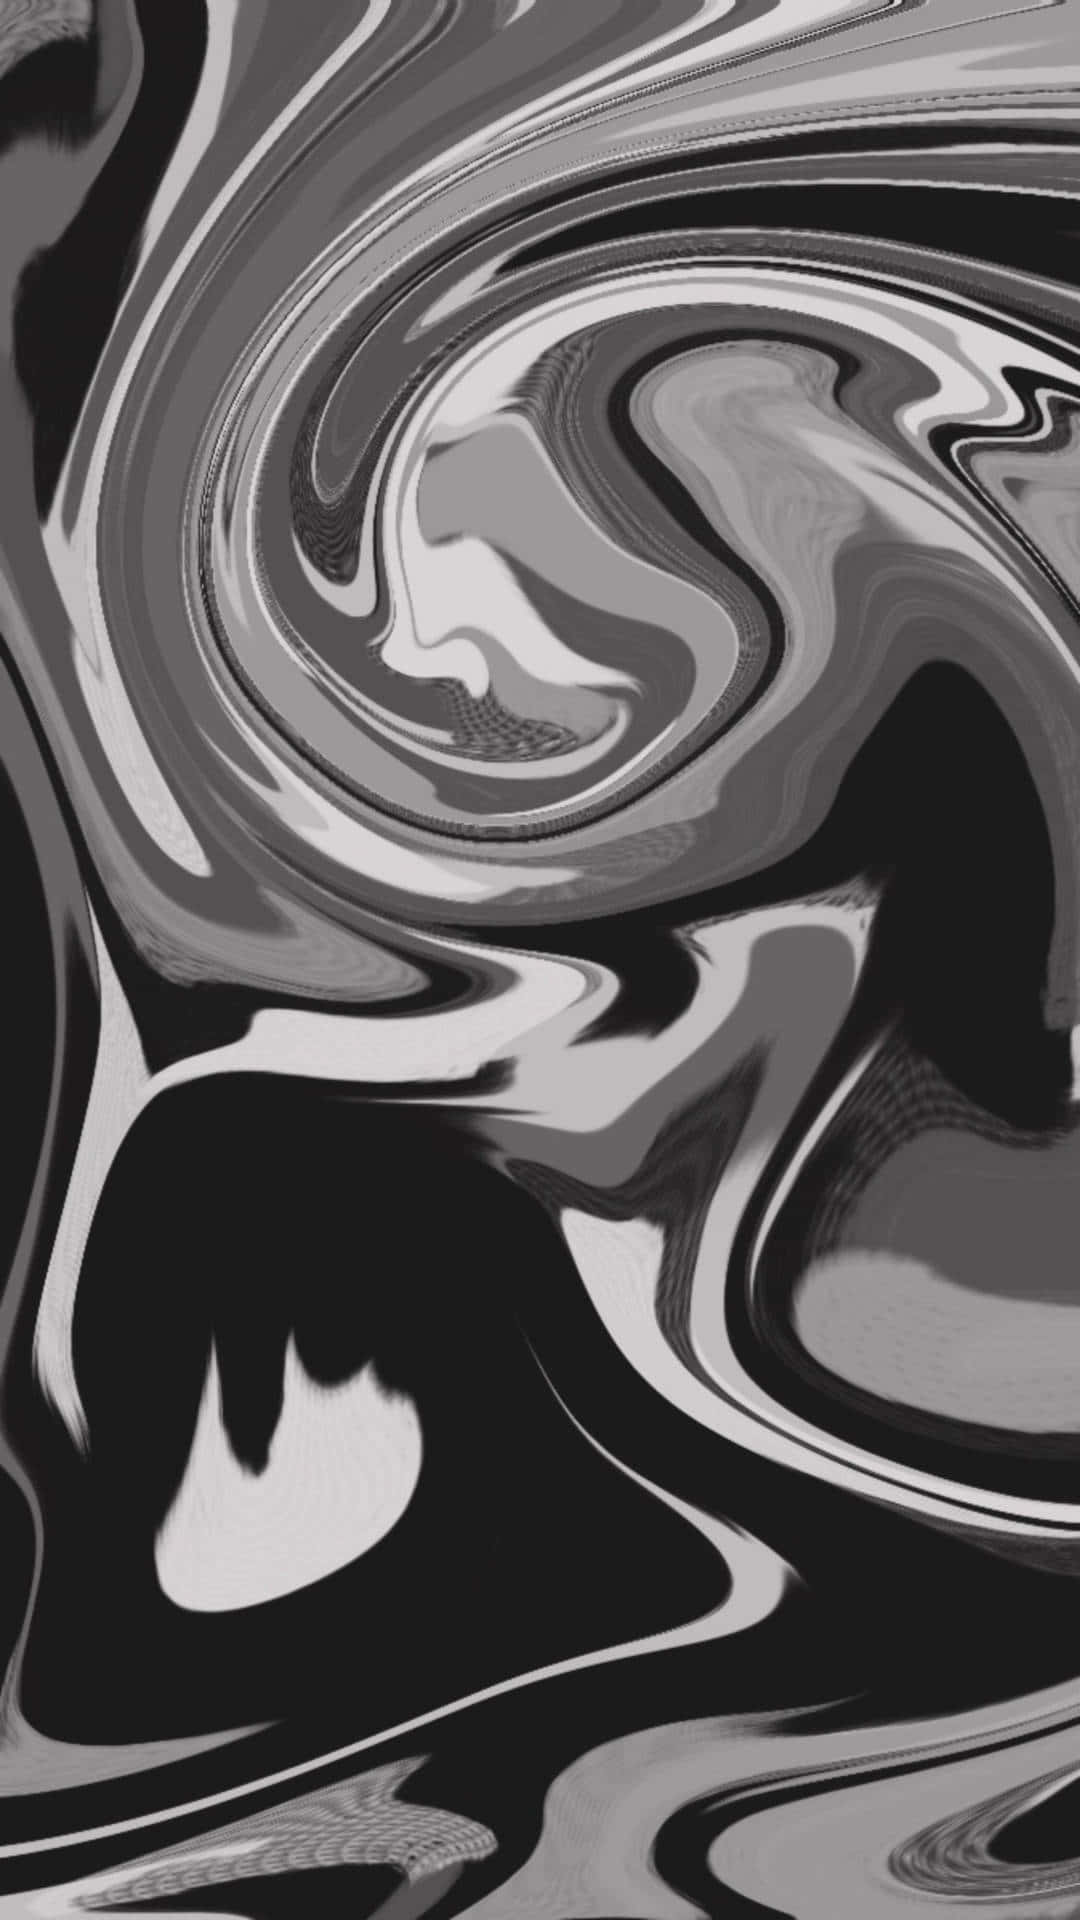 Abstract Black And Grey Swirls Background